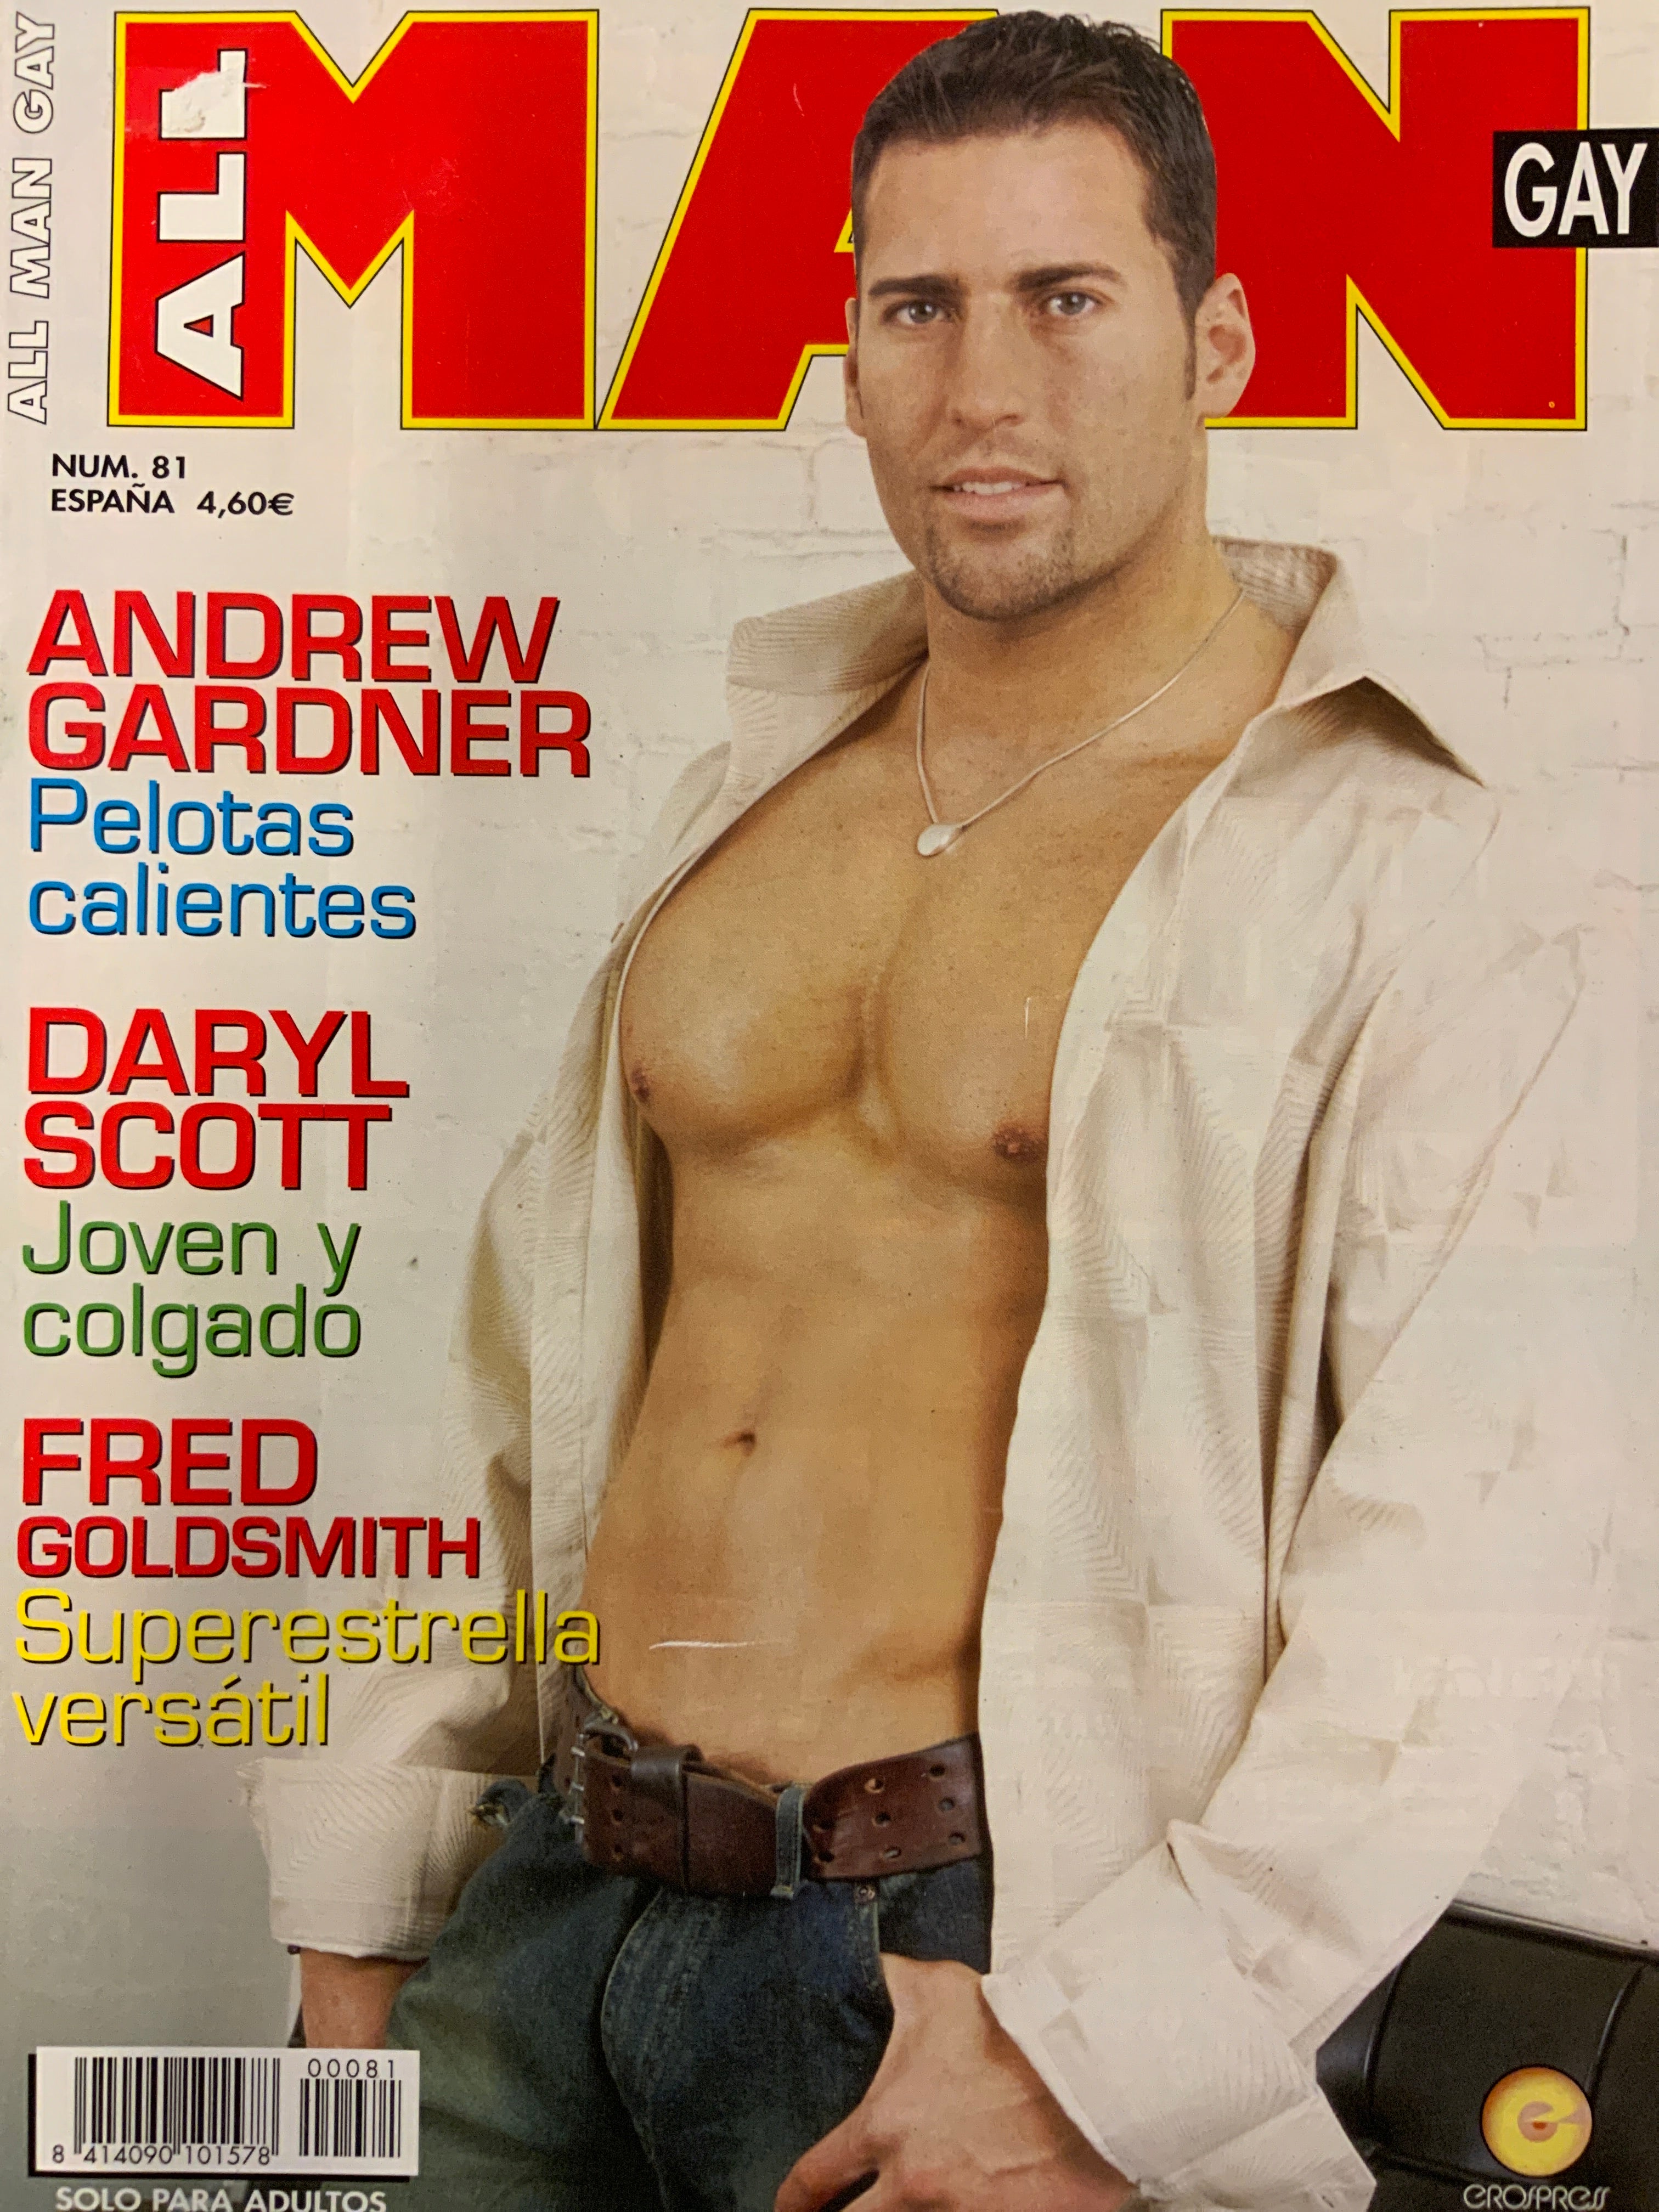 All Man Gay Adult Magazine. â€“ The Mag Store